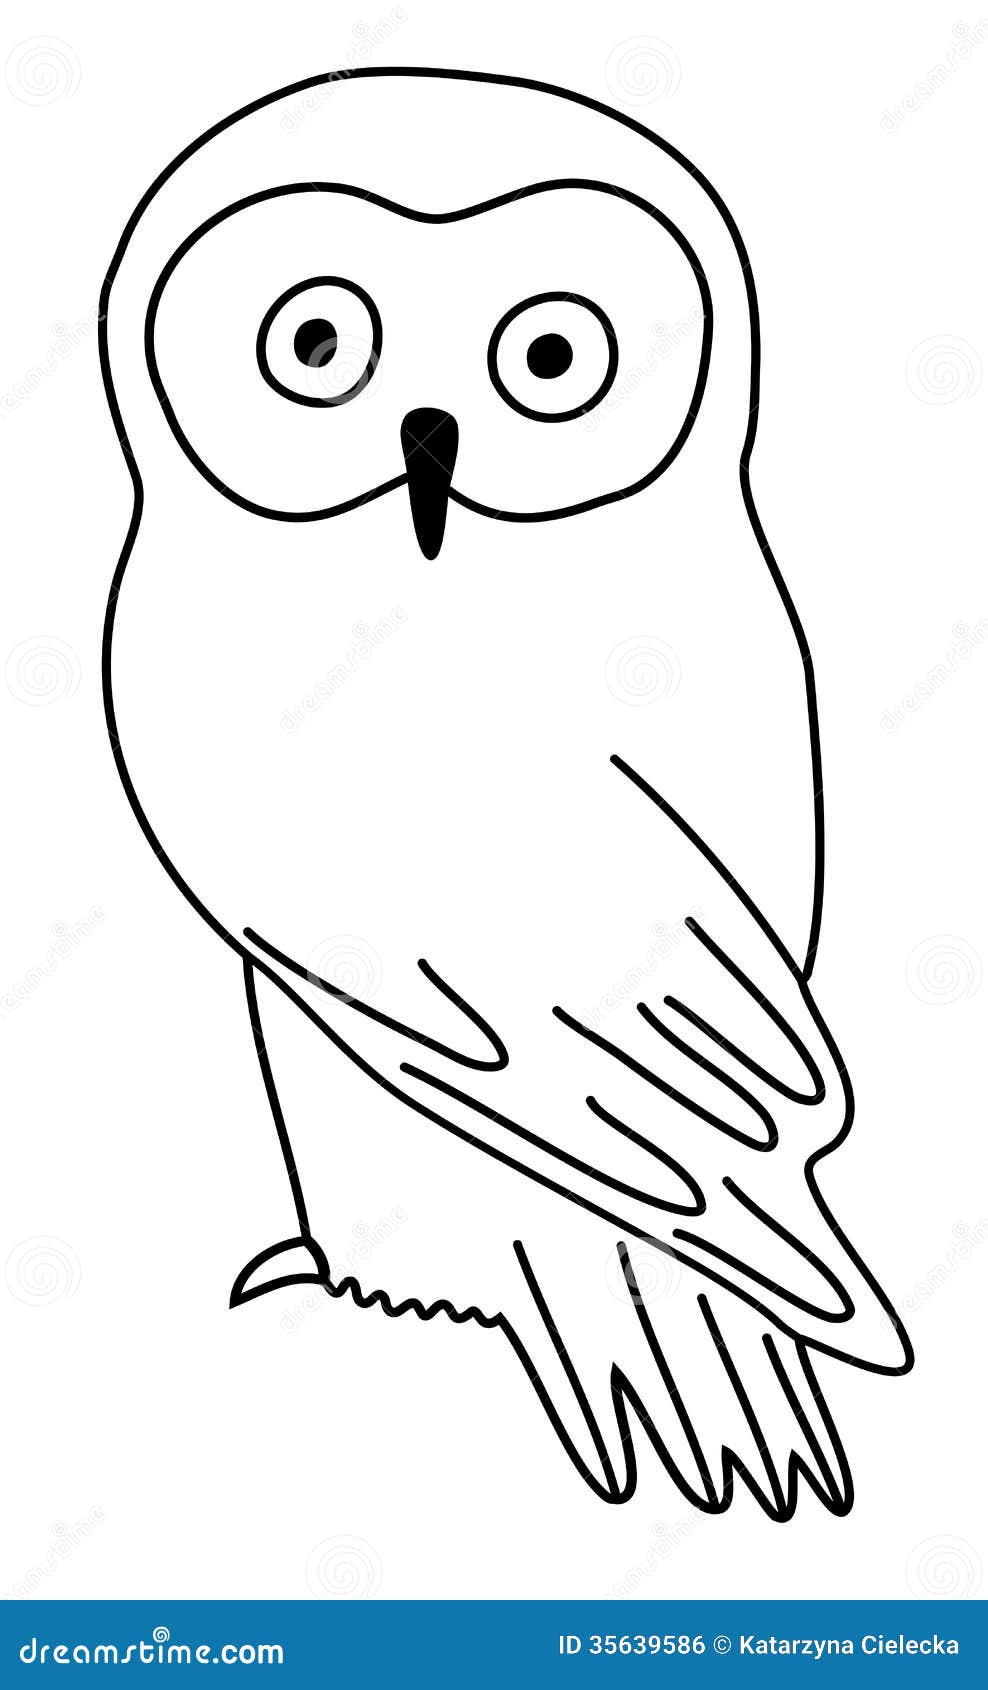 owl clipart black and white - photo #50